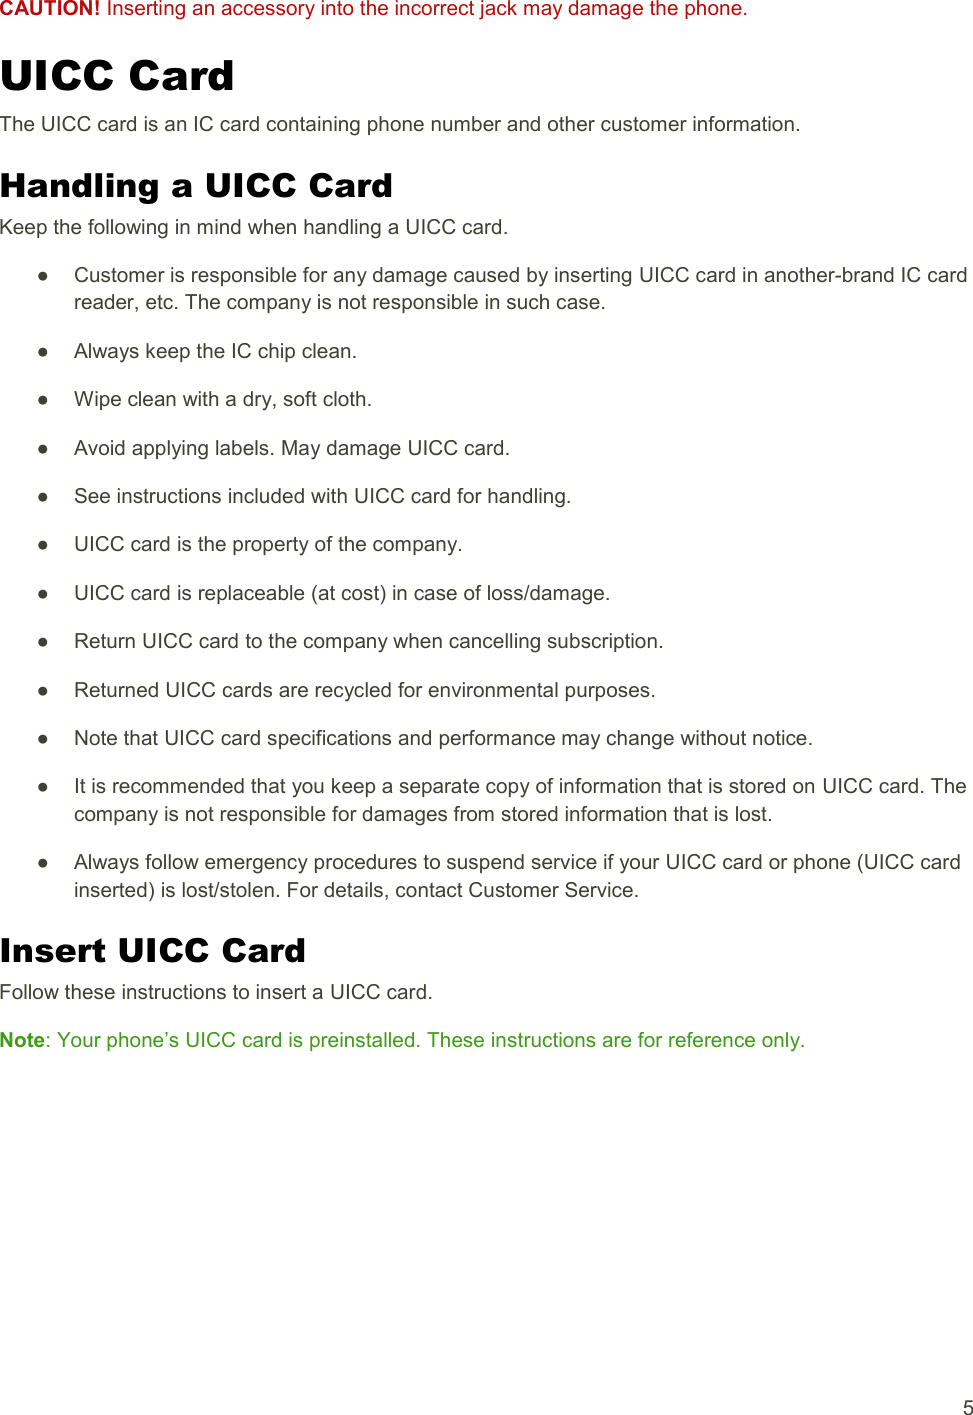   5 CAUTION! Inserting an accessory into the incorrect jack may damage the phone. UICC Card The UICC card is an IC card containing phone number and other customer information. Handling a UICC Card Keep the following in mind when handling a UICC card. ●  Customer is responsible for any damage caused by inserting UICC card in another-brand IC card reader, etc. The company is not responsible in such case. ●  Always keep the IC chip clean. ●  Wipe clean with a dry, soft cloth. ●  Avoid applying labels. May damage UICC card. ●  See instructions included with UICC card for handling. ●  UICC card is the property of the company. ●  UICC card is replaceable (at cost) in case of loss/damage. ●  Return UICC card to the company when cancelling subscription. ●  Returned UICC cards are recycled for environmental purposes. ●  Note that UICC card specifications and performance may change without notice. ●  It is recommended that you keep a separate copy of information that is stored on UICC card. The company is not responsible for damages from stored information that is lost. ●  Always follow emergency procedures to suspend service if your UICC card or phone (UICC card inserted) is lost/stolen. For details, contact Customer Service. Insert UICC Card Follow these instructions to insert a UICC card.  Note: Your phone’s UICC card is preinstalled. These instructions are for reference only. 